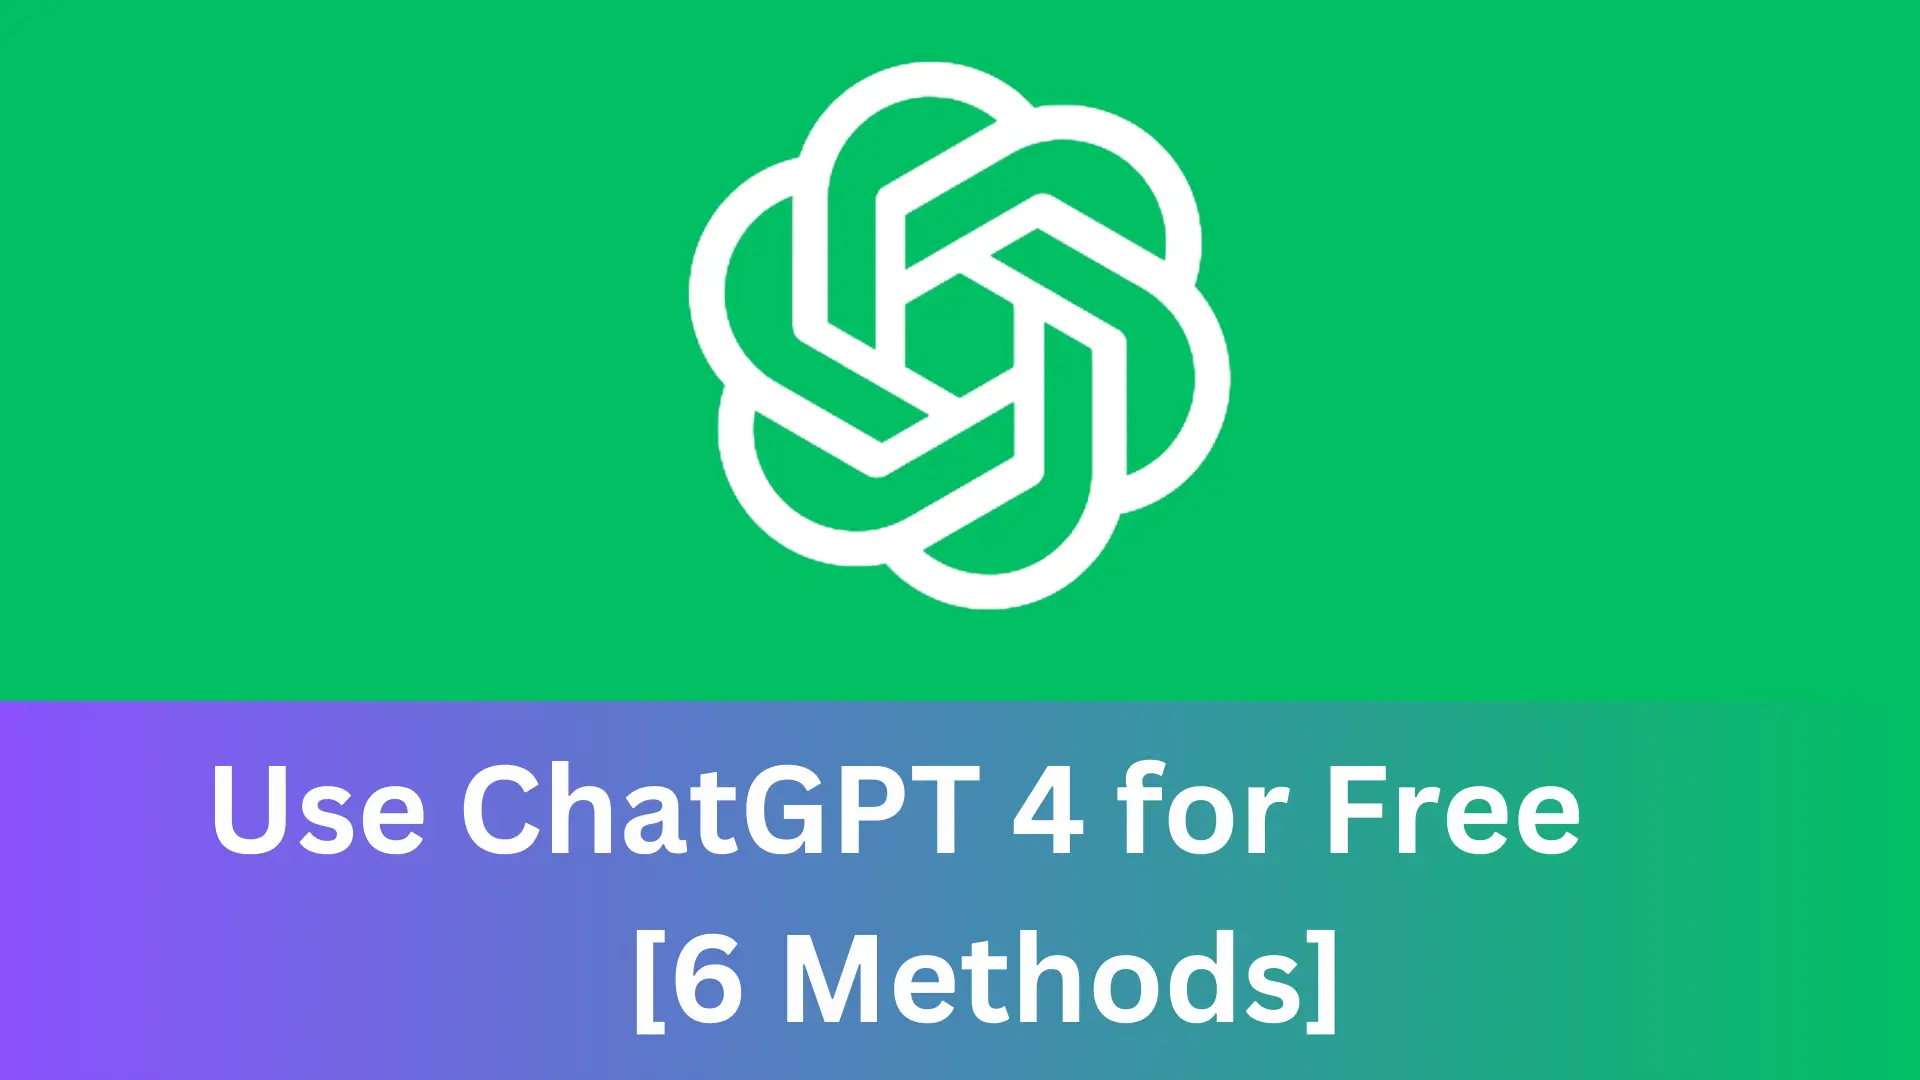 6 Ways to Access ChatGPT 4 for free